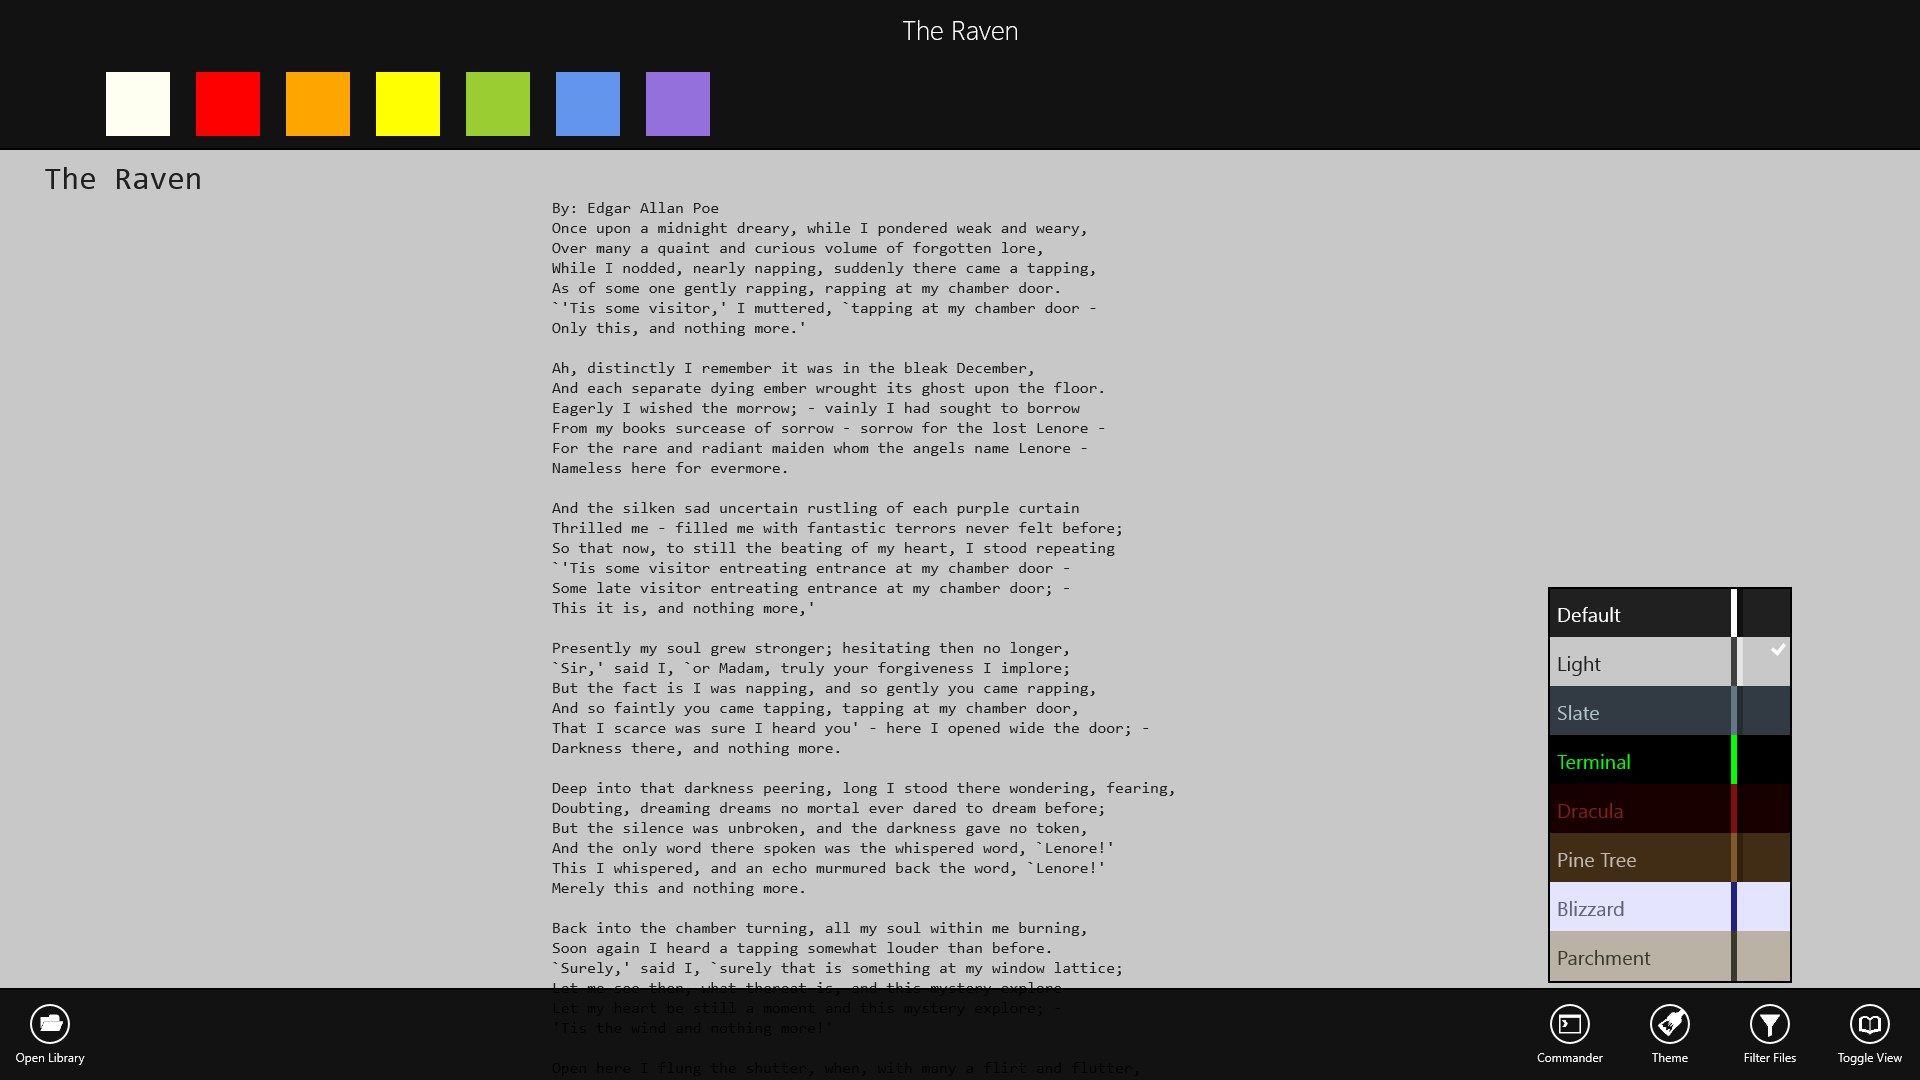 The Light Theme attempts to reproduce classic pen and paper colors.